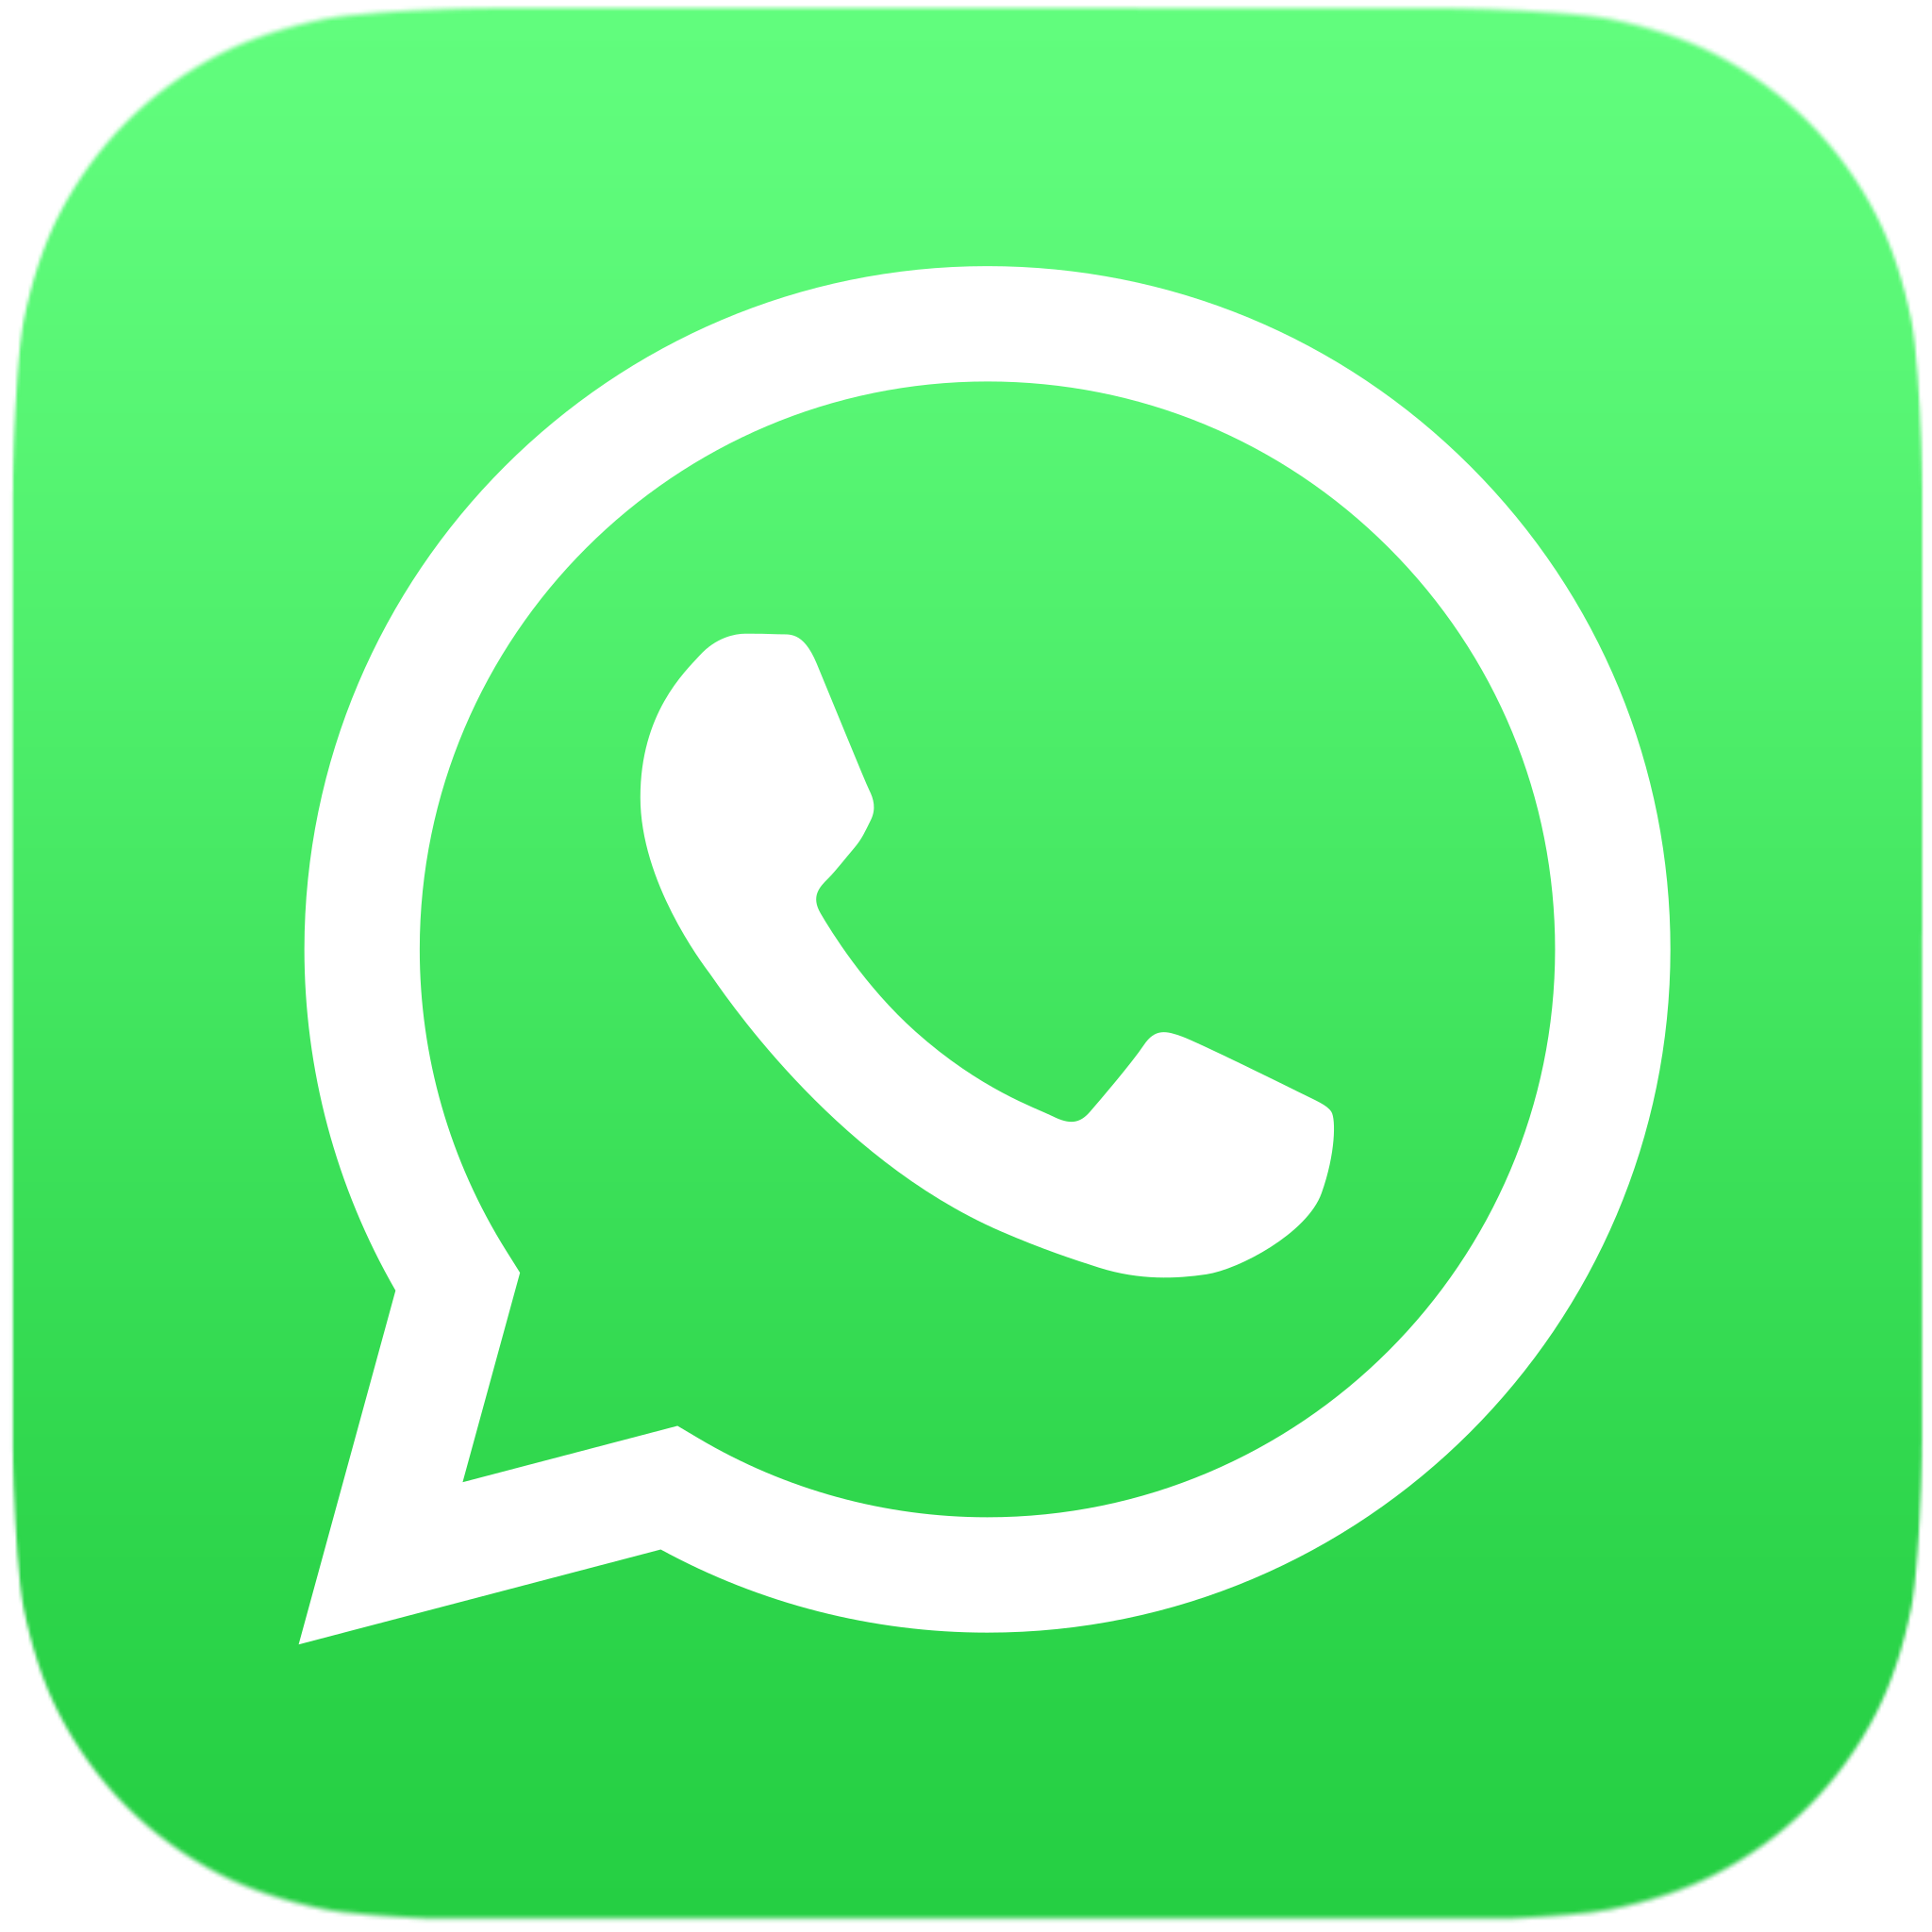 Click to contact us on Whatsapp